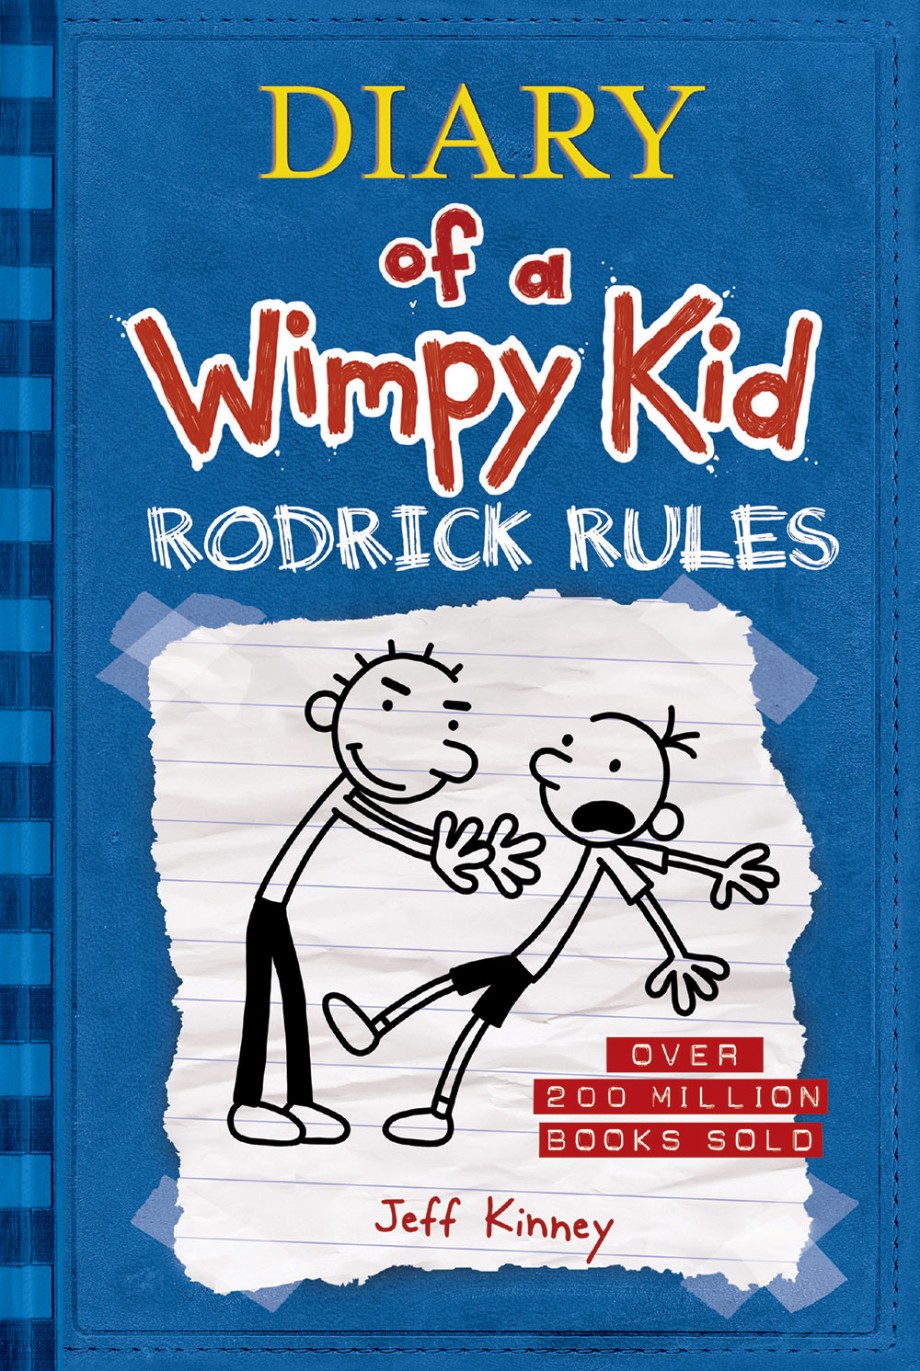 Rodrick Rules (Diary of a Wimpy Kid #2) 